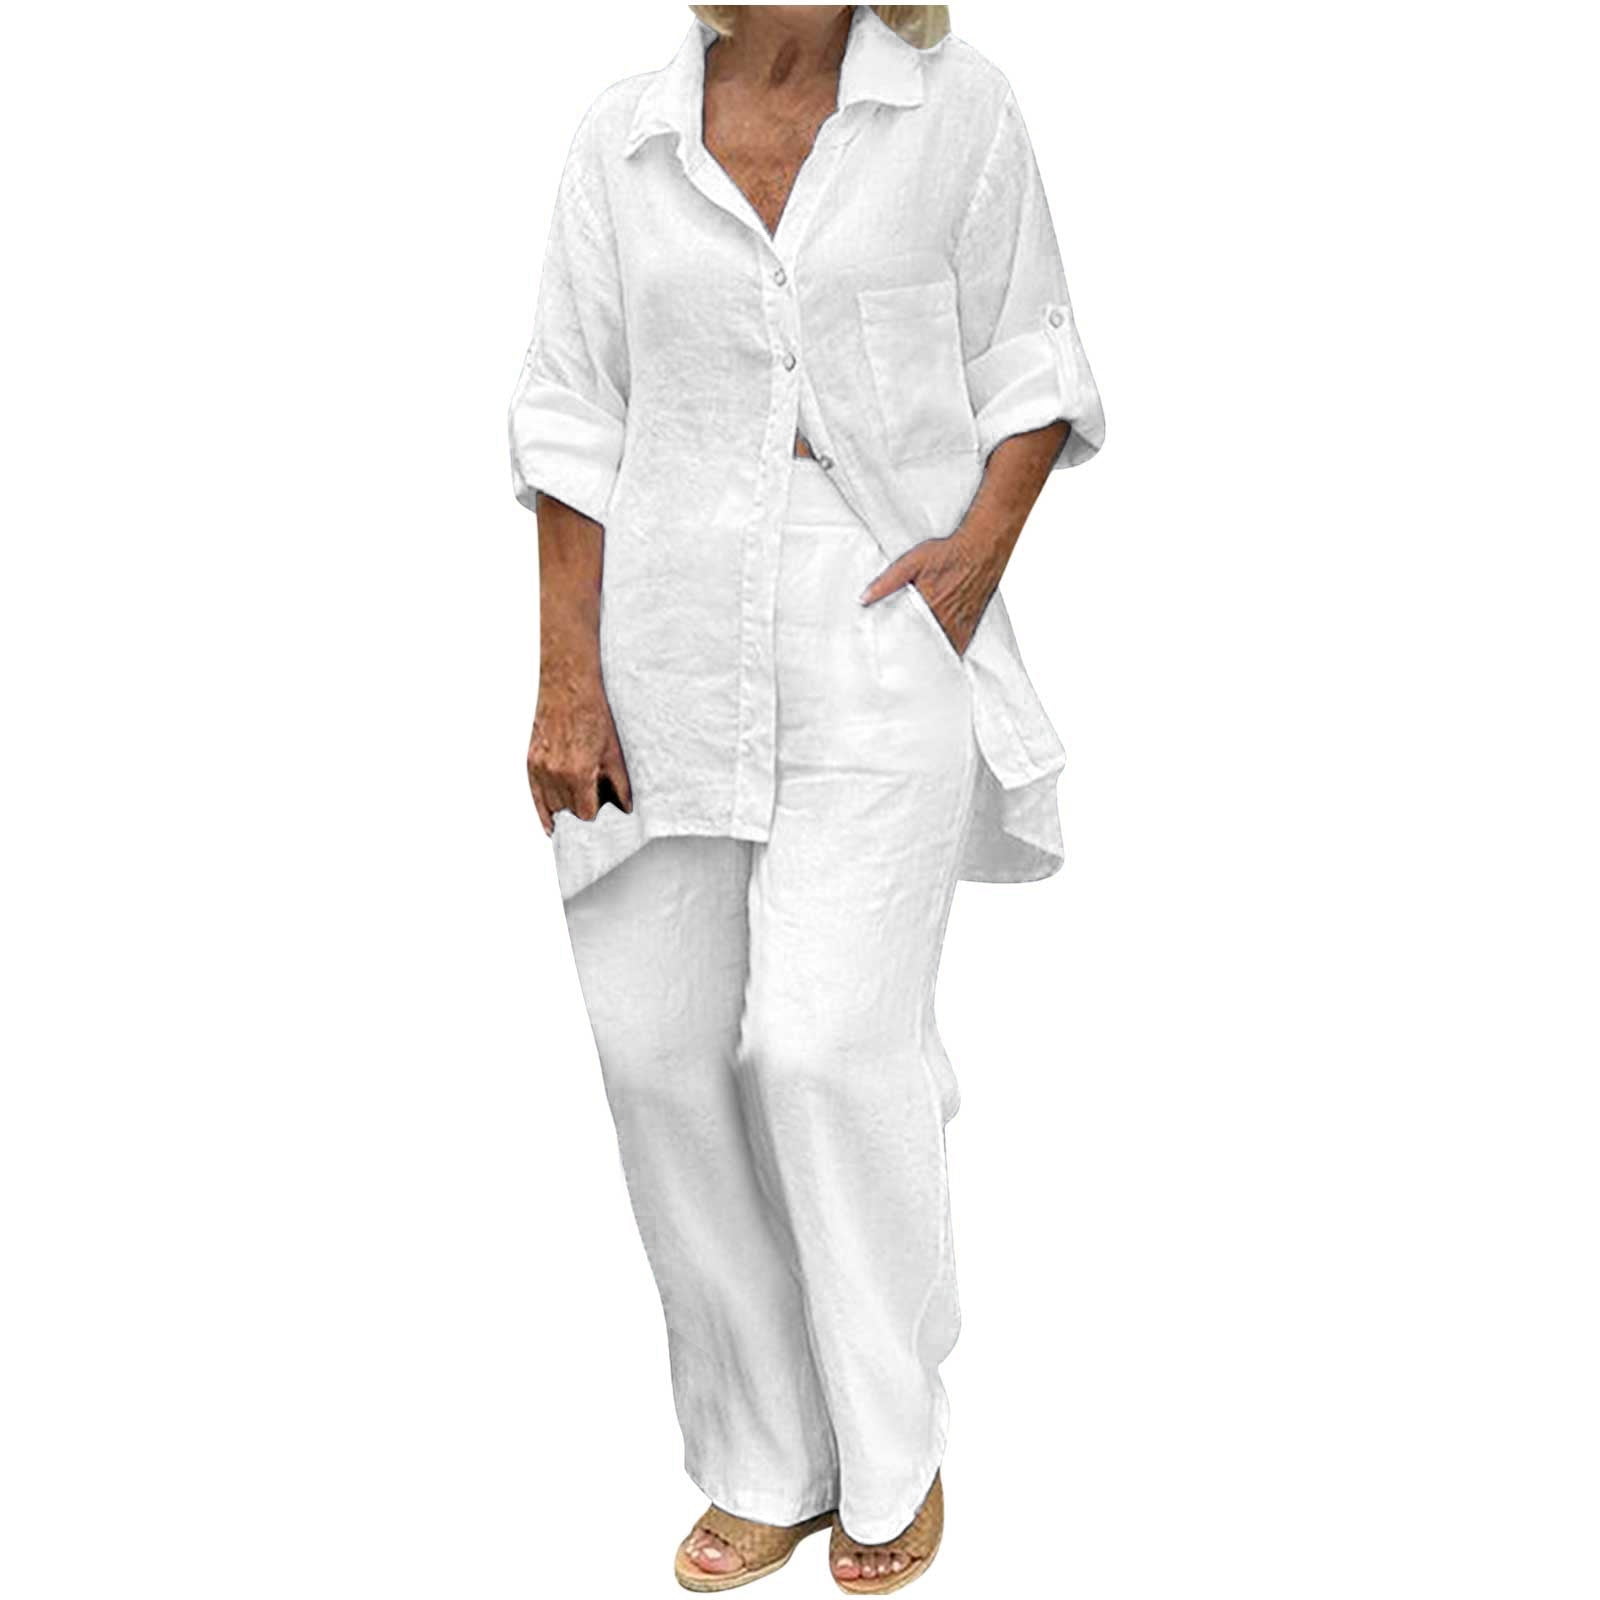 Plus Size Summer Outfits for Women 2 Piece Linen Sets Long Sleeve